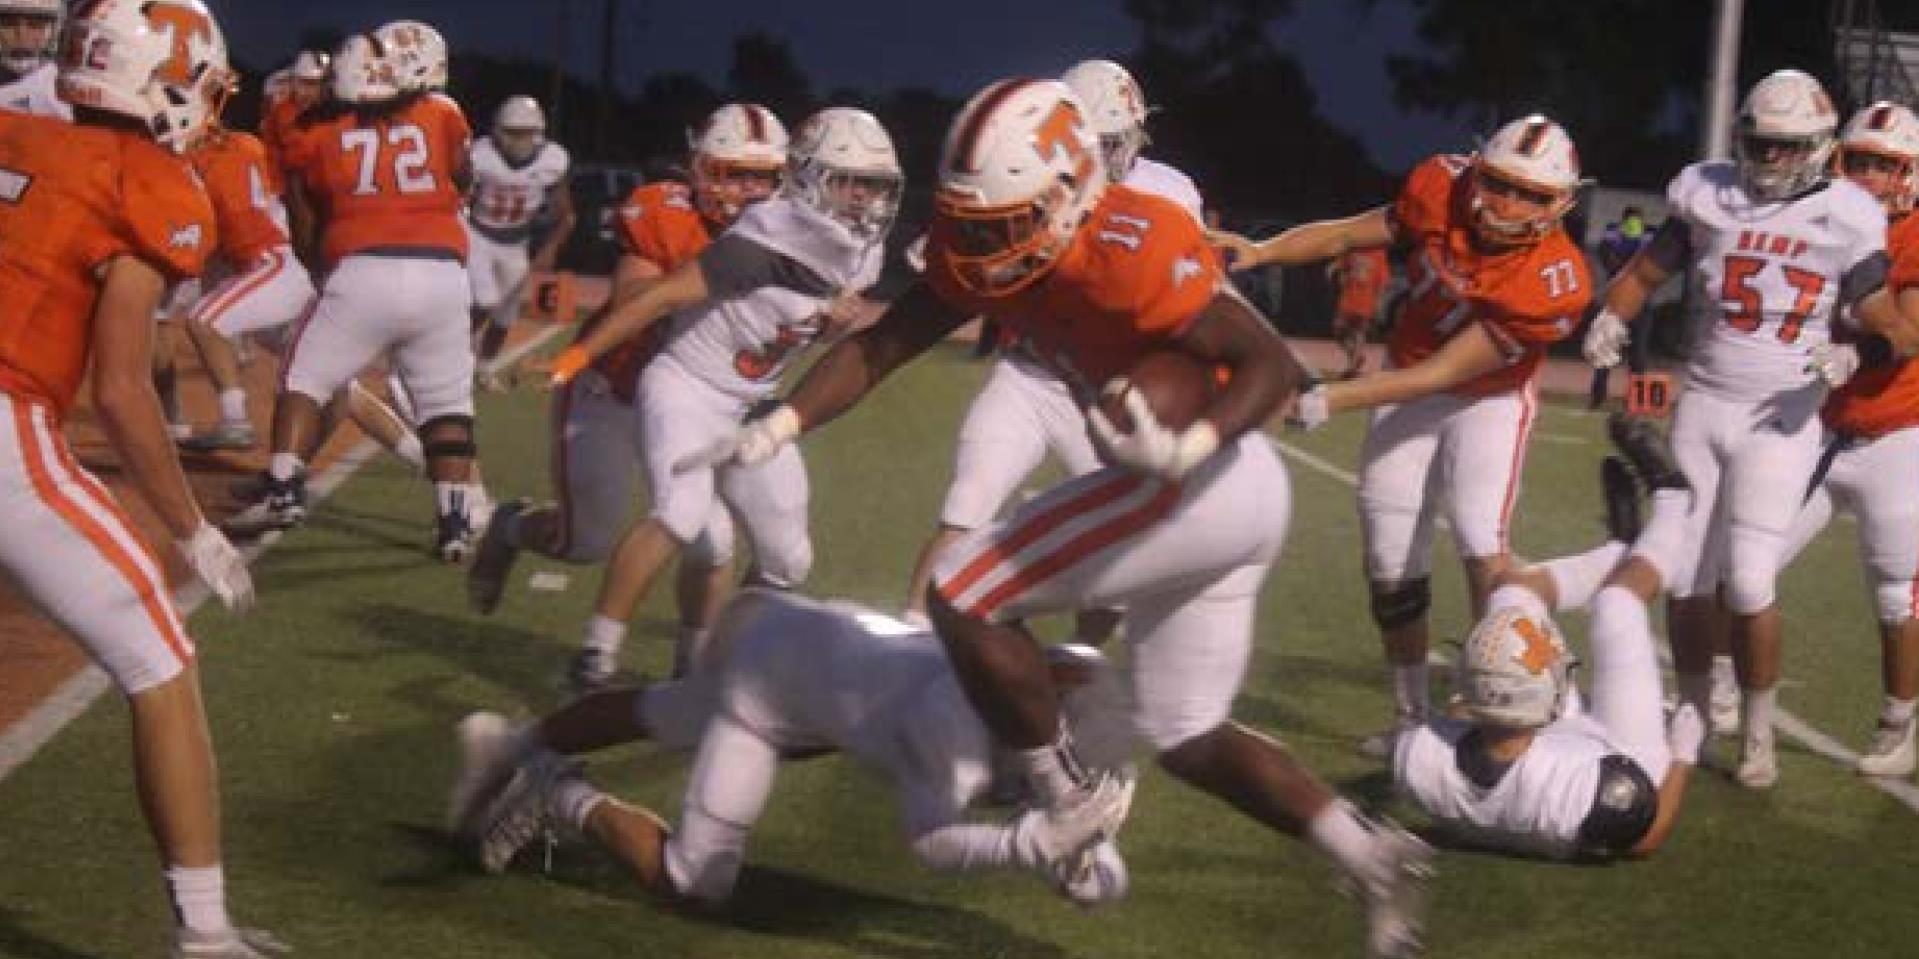 Yellowjackets sting Lions in district opener 48-34 | Groesbeck Journal